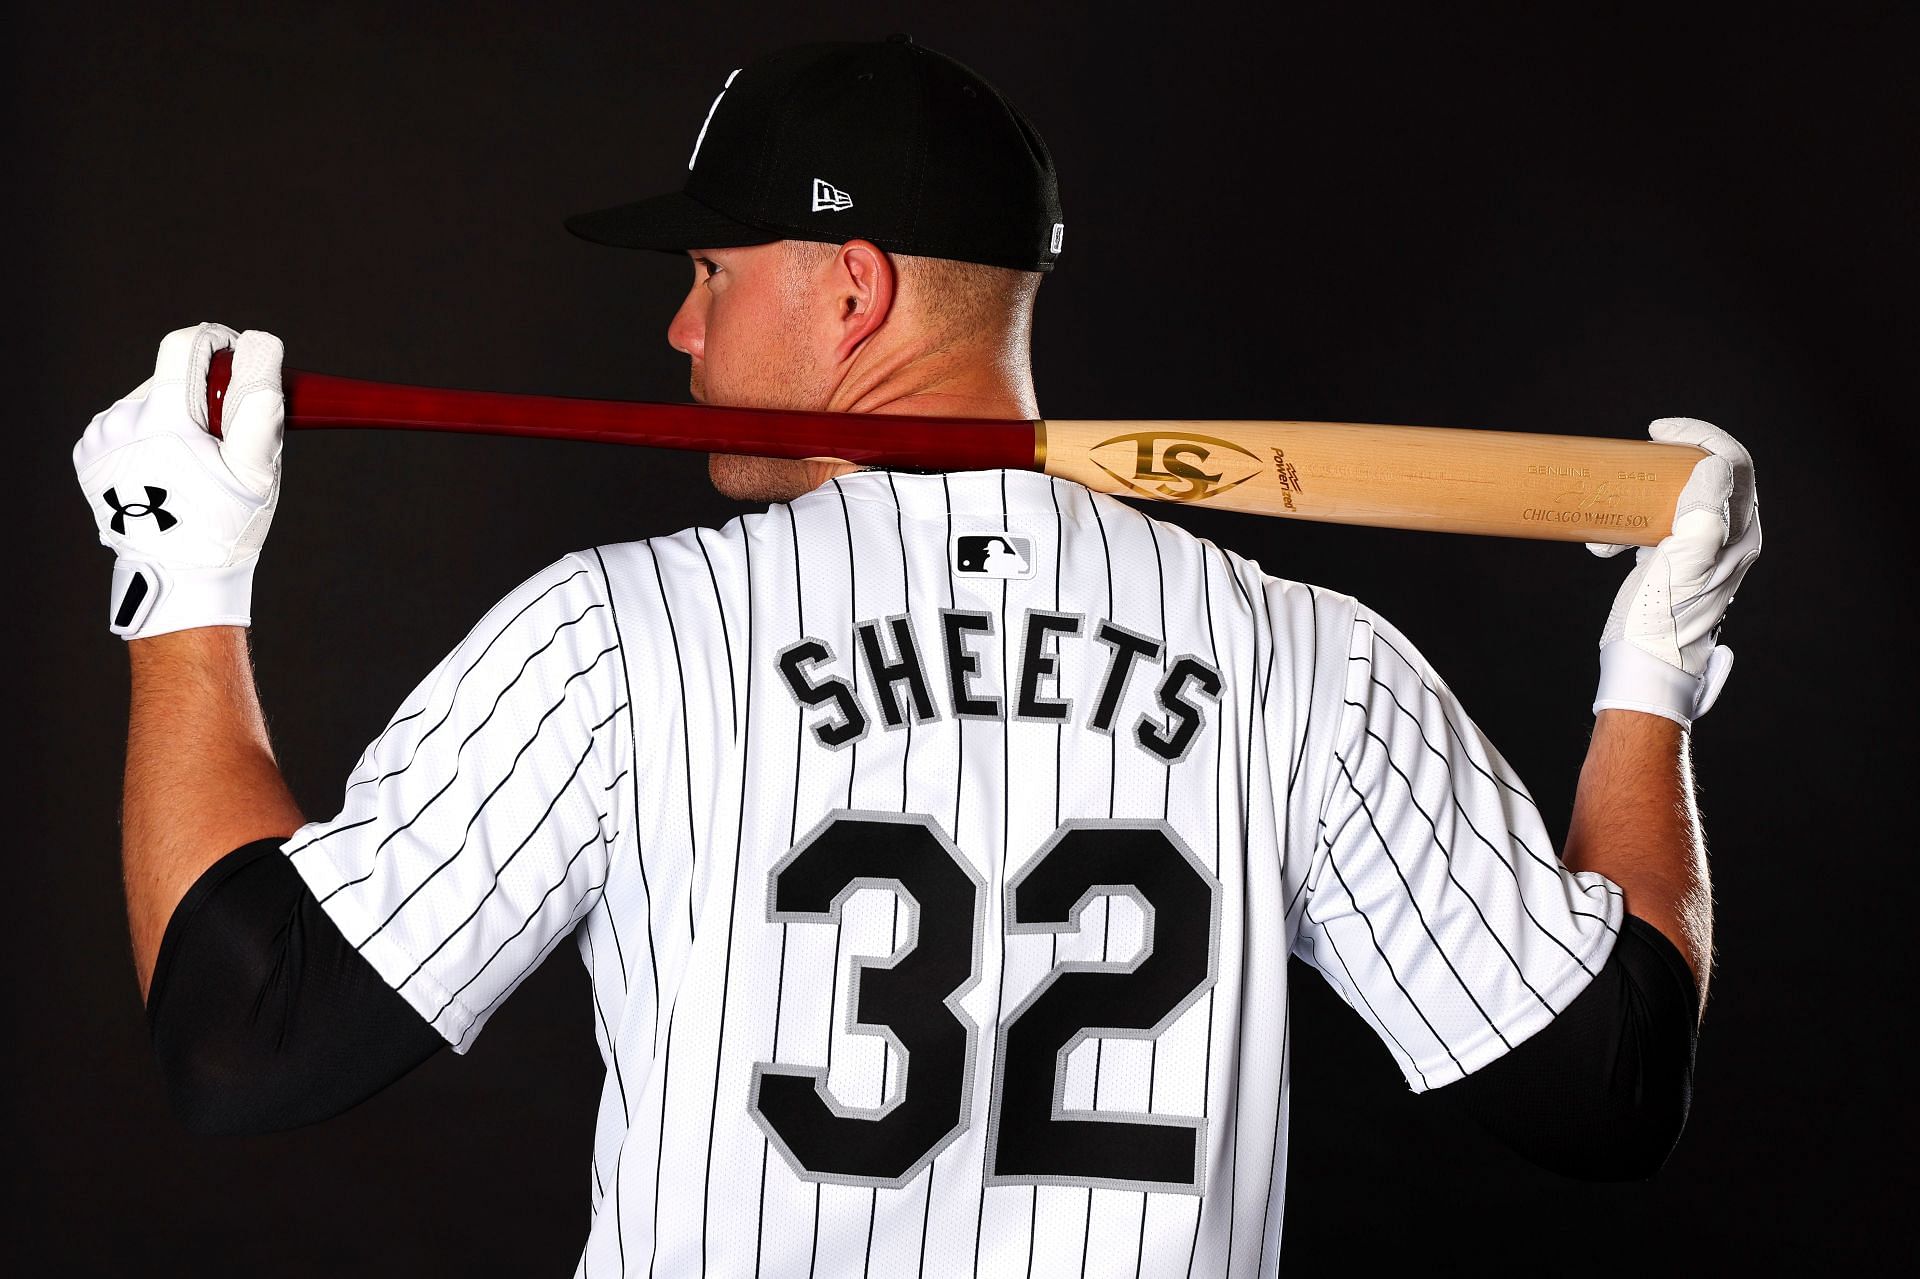 This move particularly benefits the son of Larry Sheets, Gavin, who has been hitting .296 in spring training.